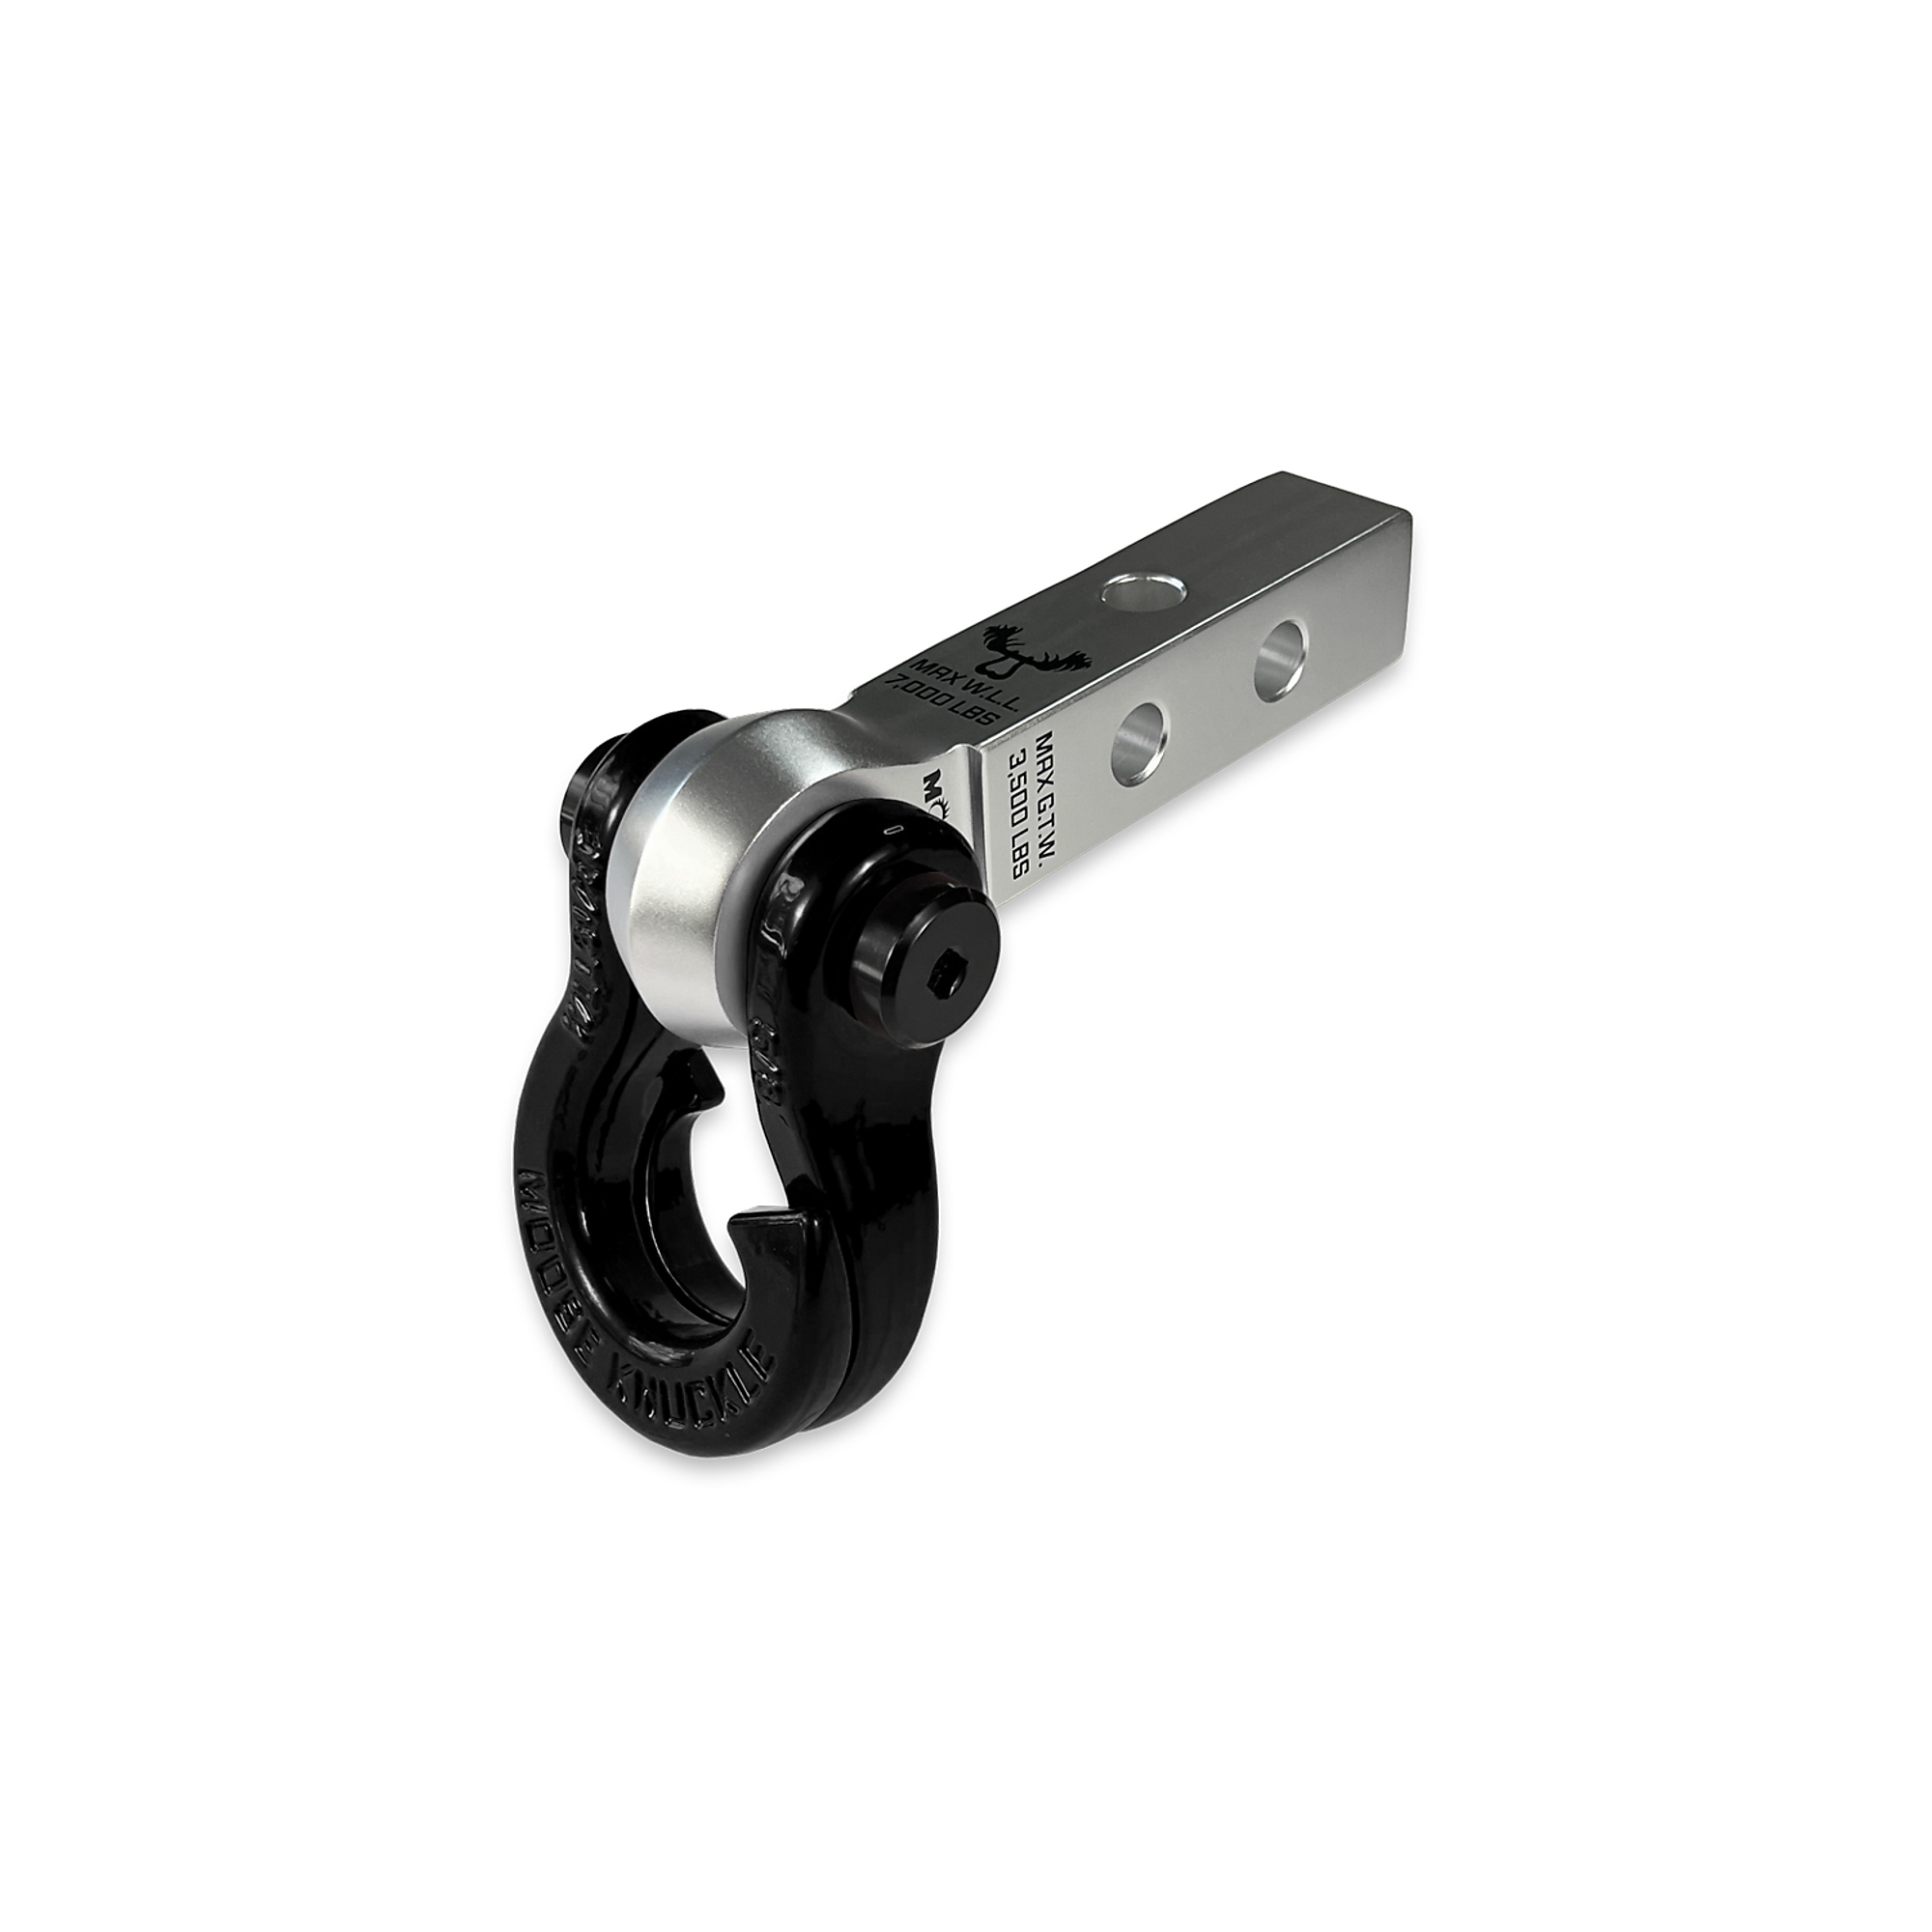 Moose Knuckle Offroad, 5/8 Jowl Split Shackle and Mohawk 1.25 Receiver Combo, Gross Towing Weight 3500 lb, Class Rating Class II, Model FN000043-009